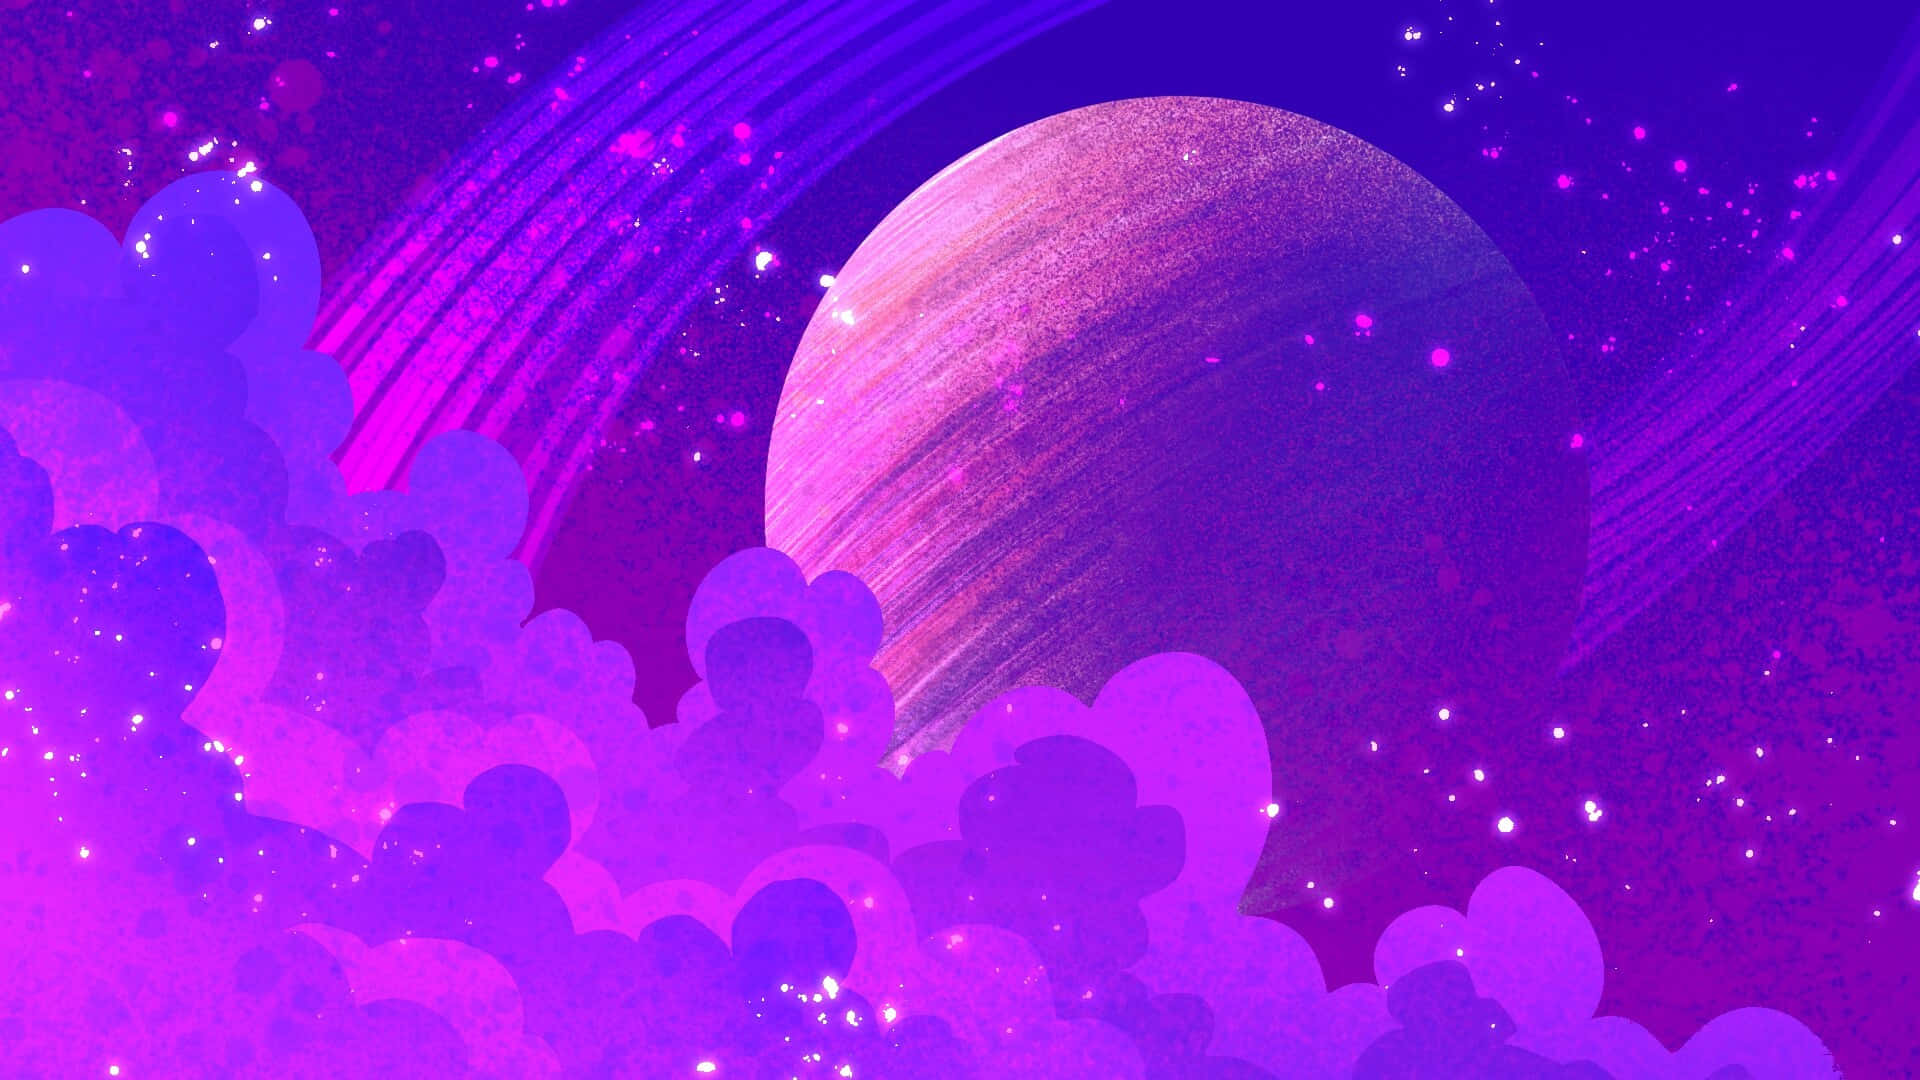 100+] Animated Space Wallpapers 